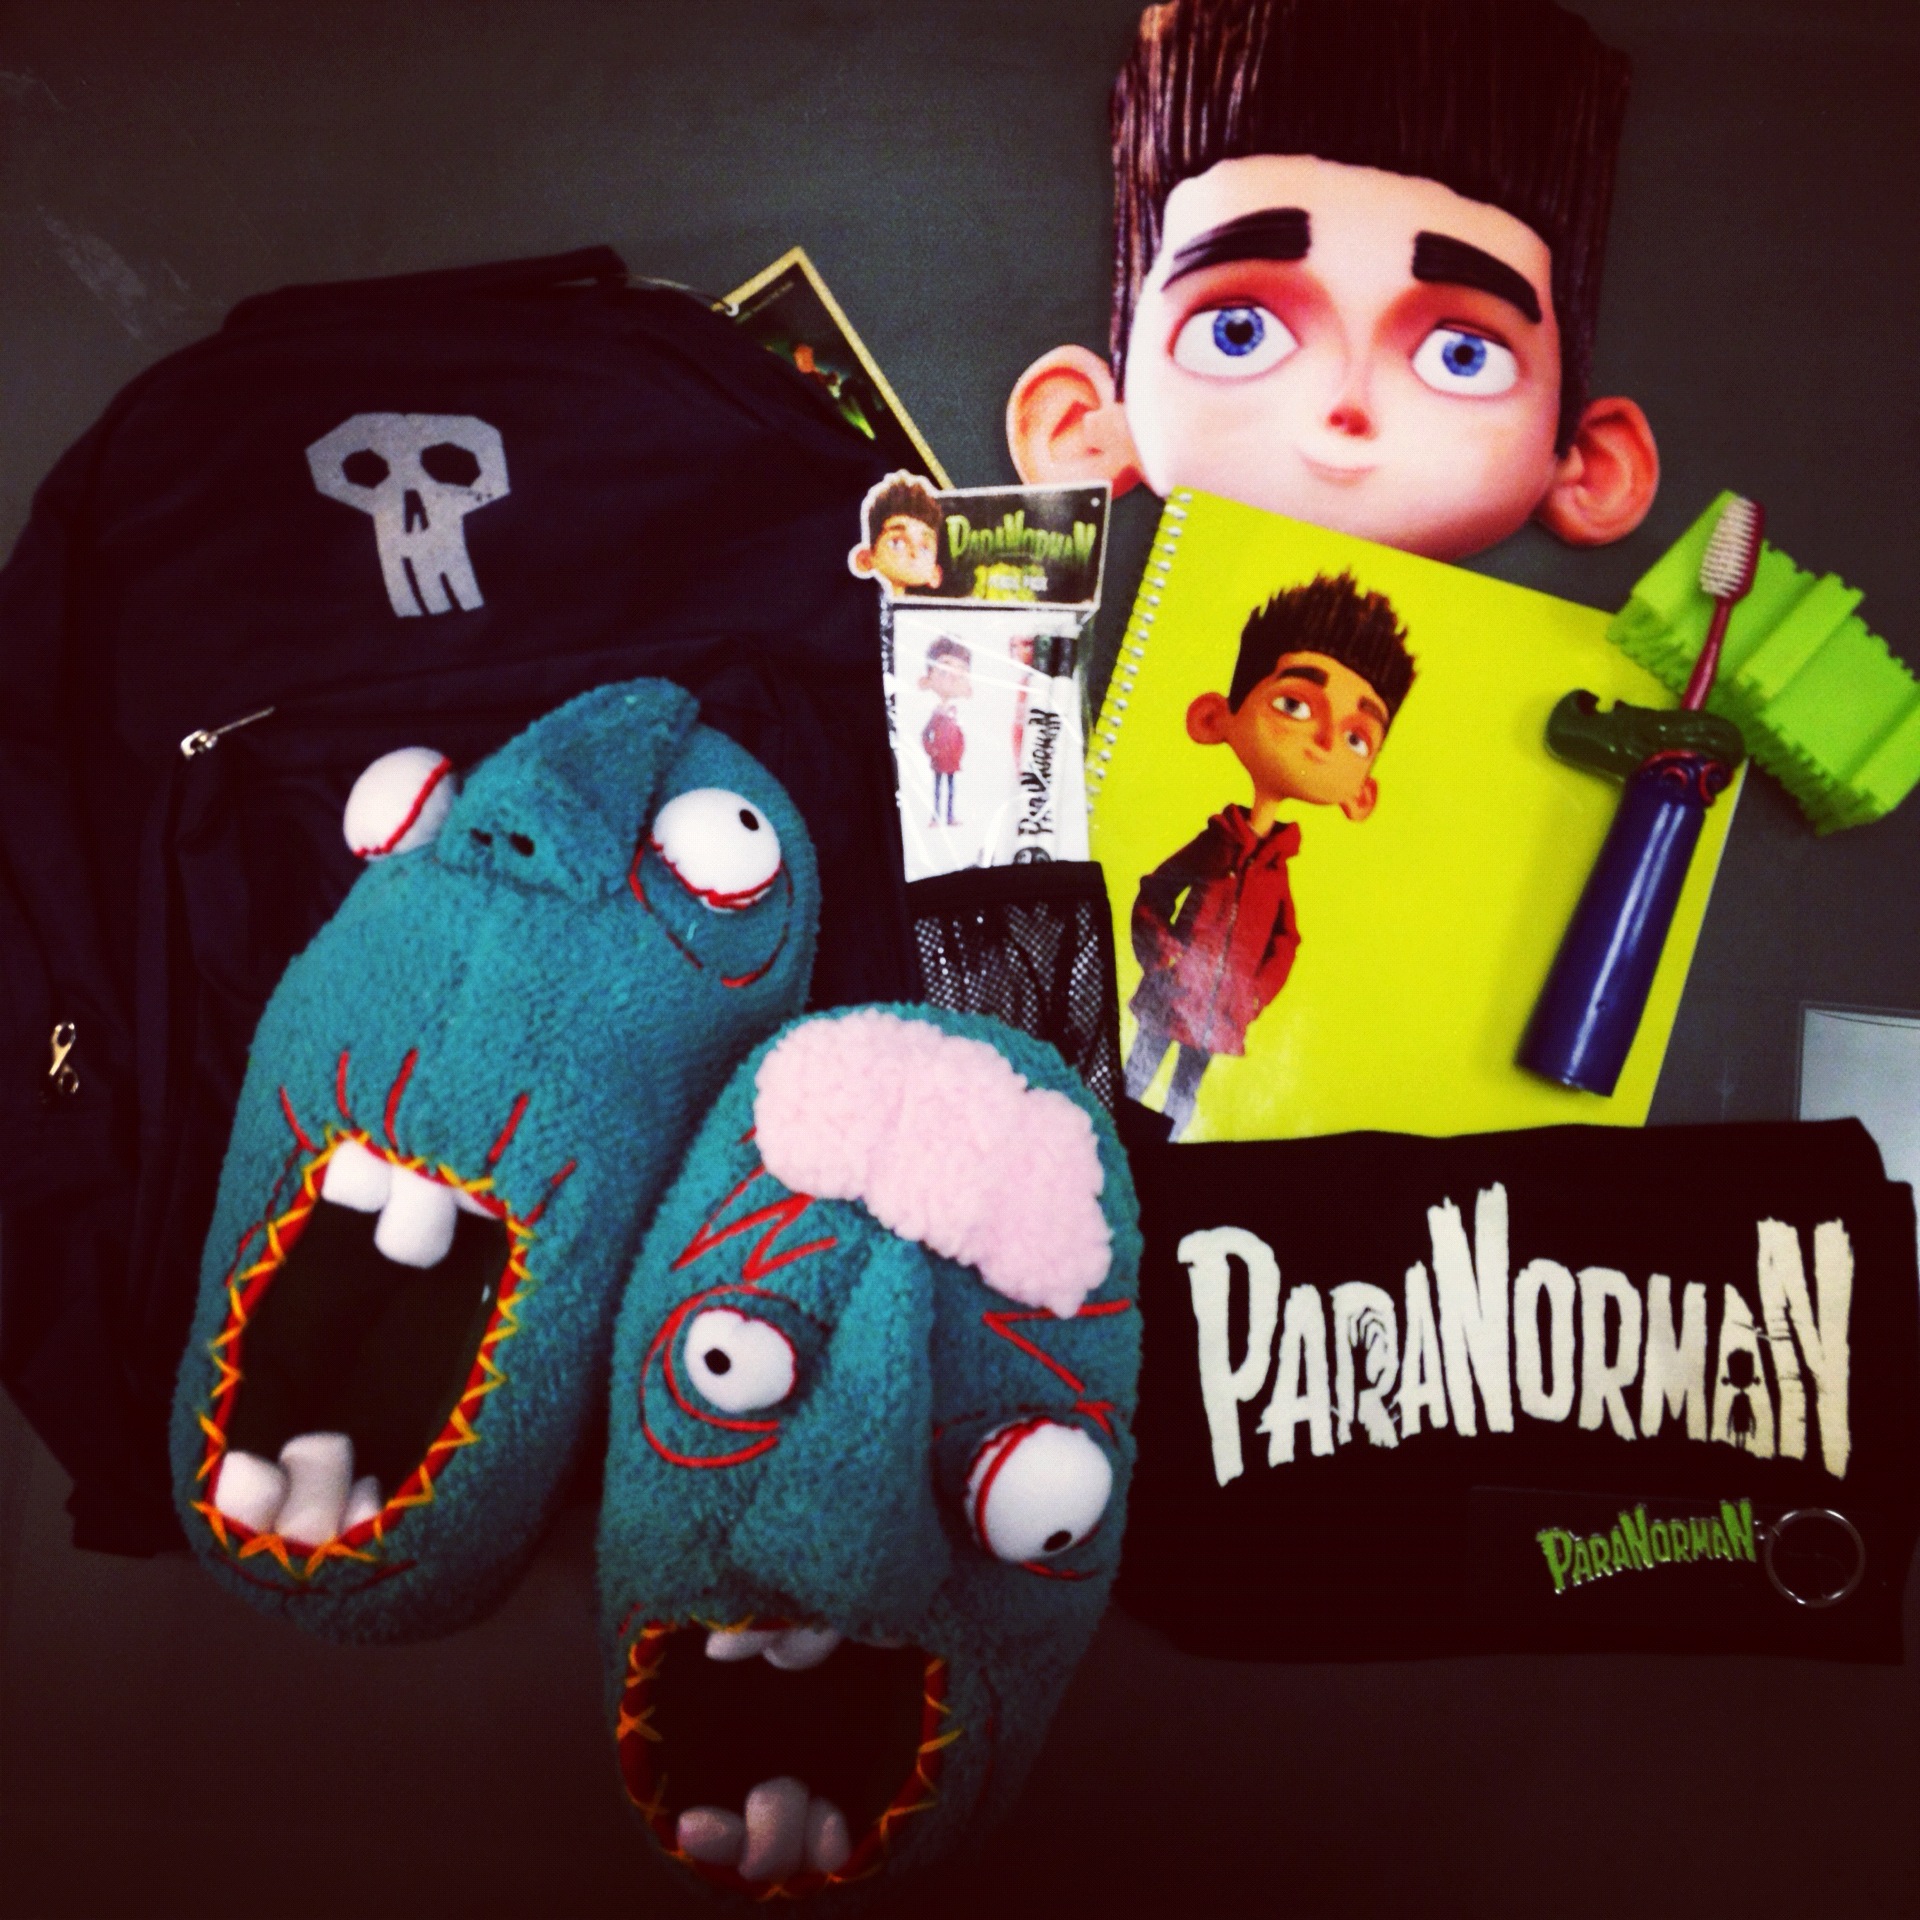 ParaNorman hits theaters on Friday, August 17th. 